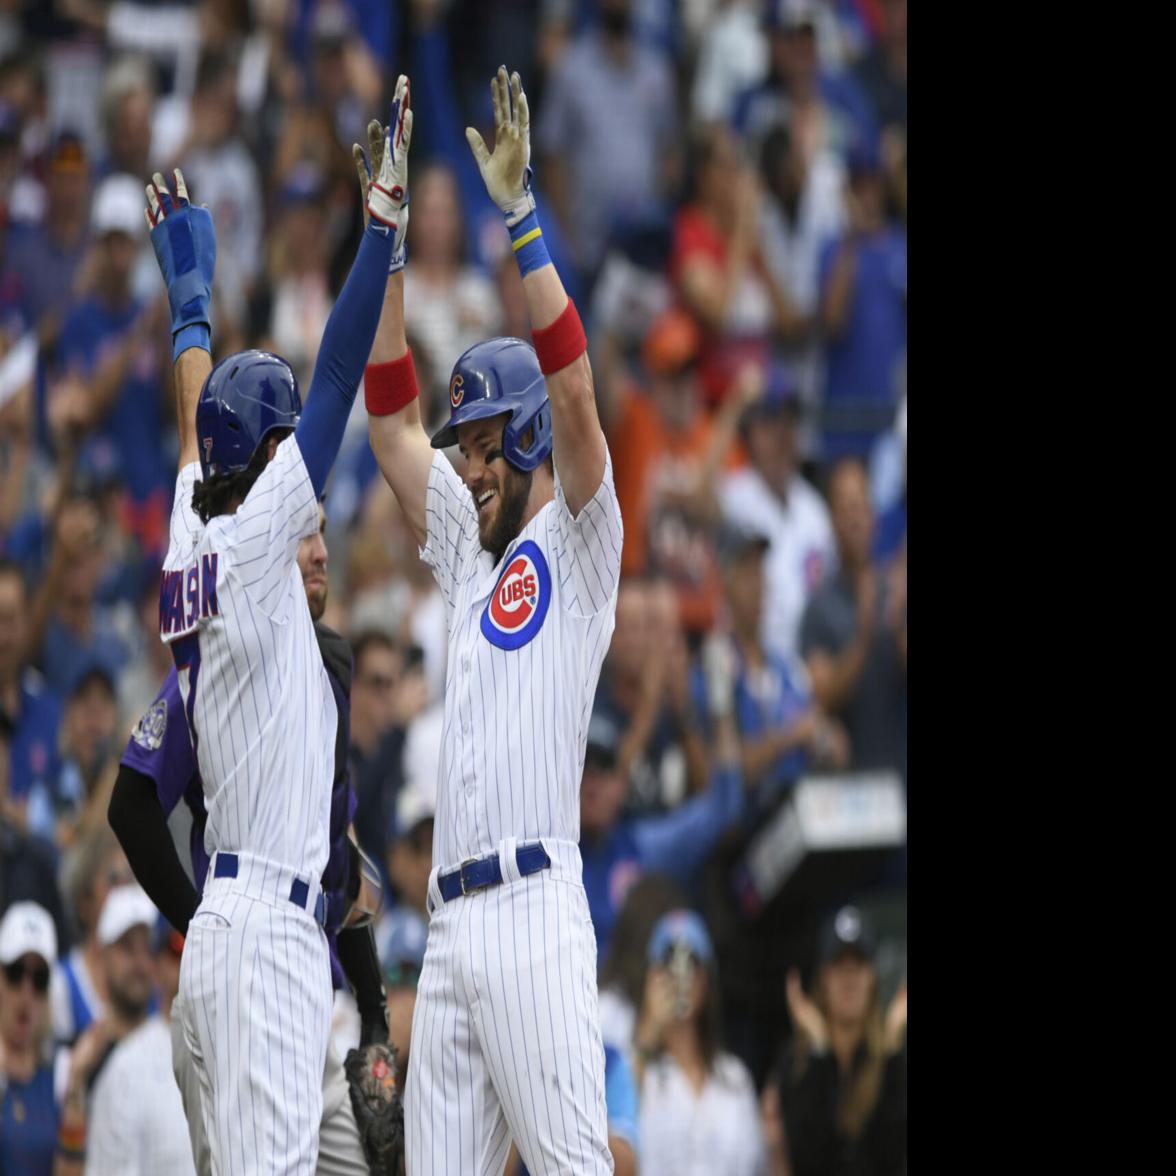 Cubs' Yan Gomes records two hits in win versus Royals